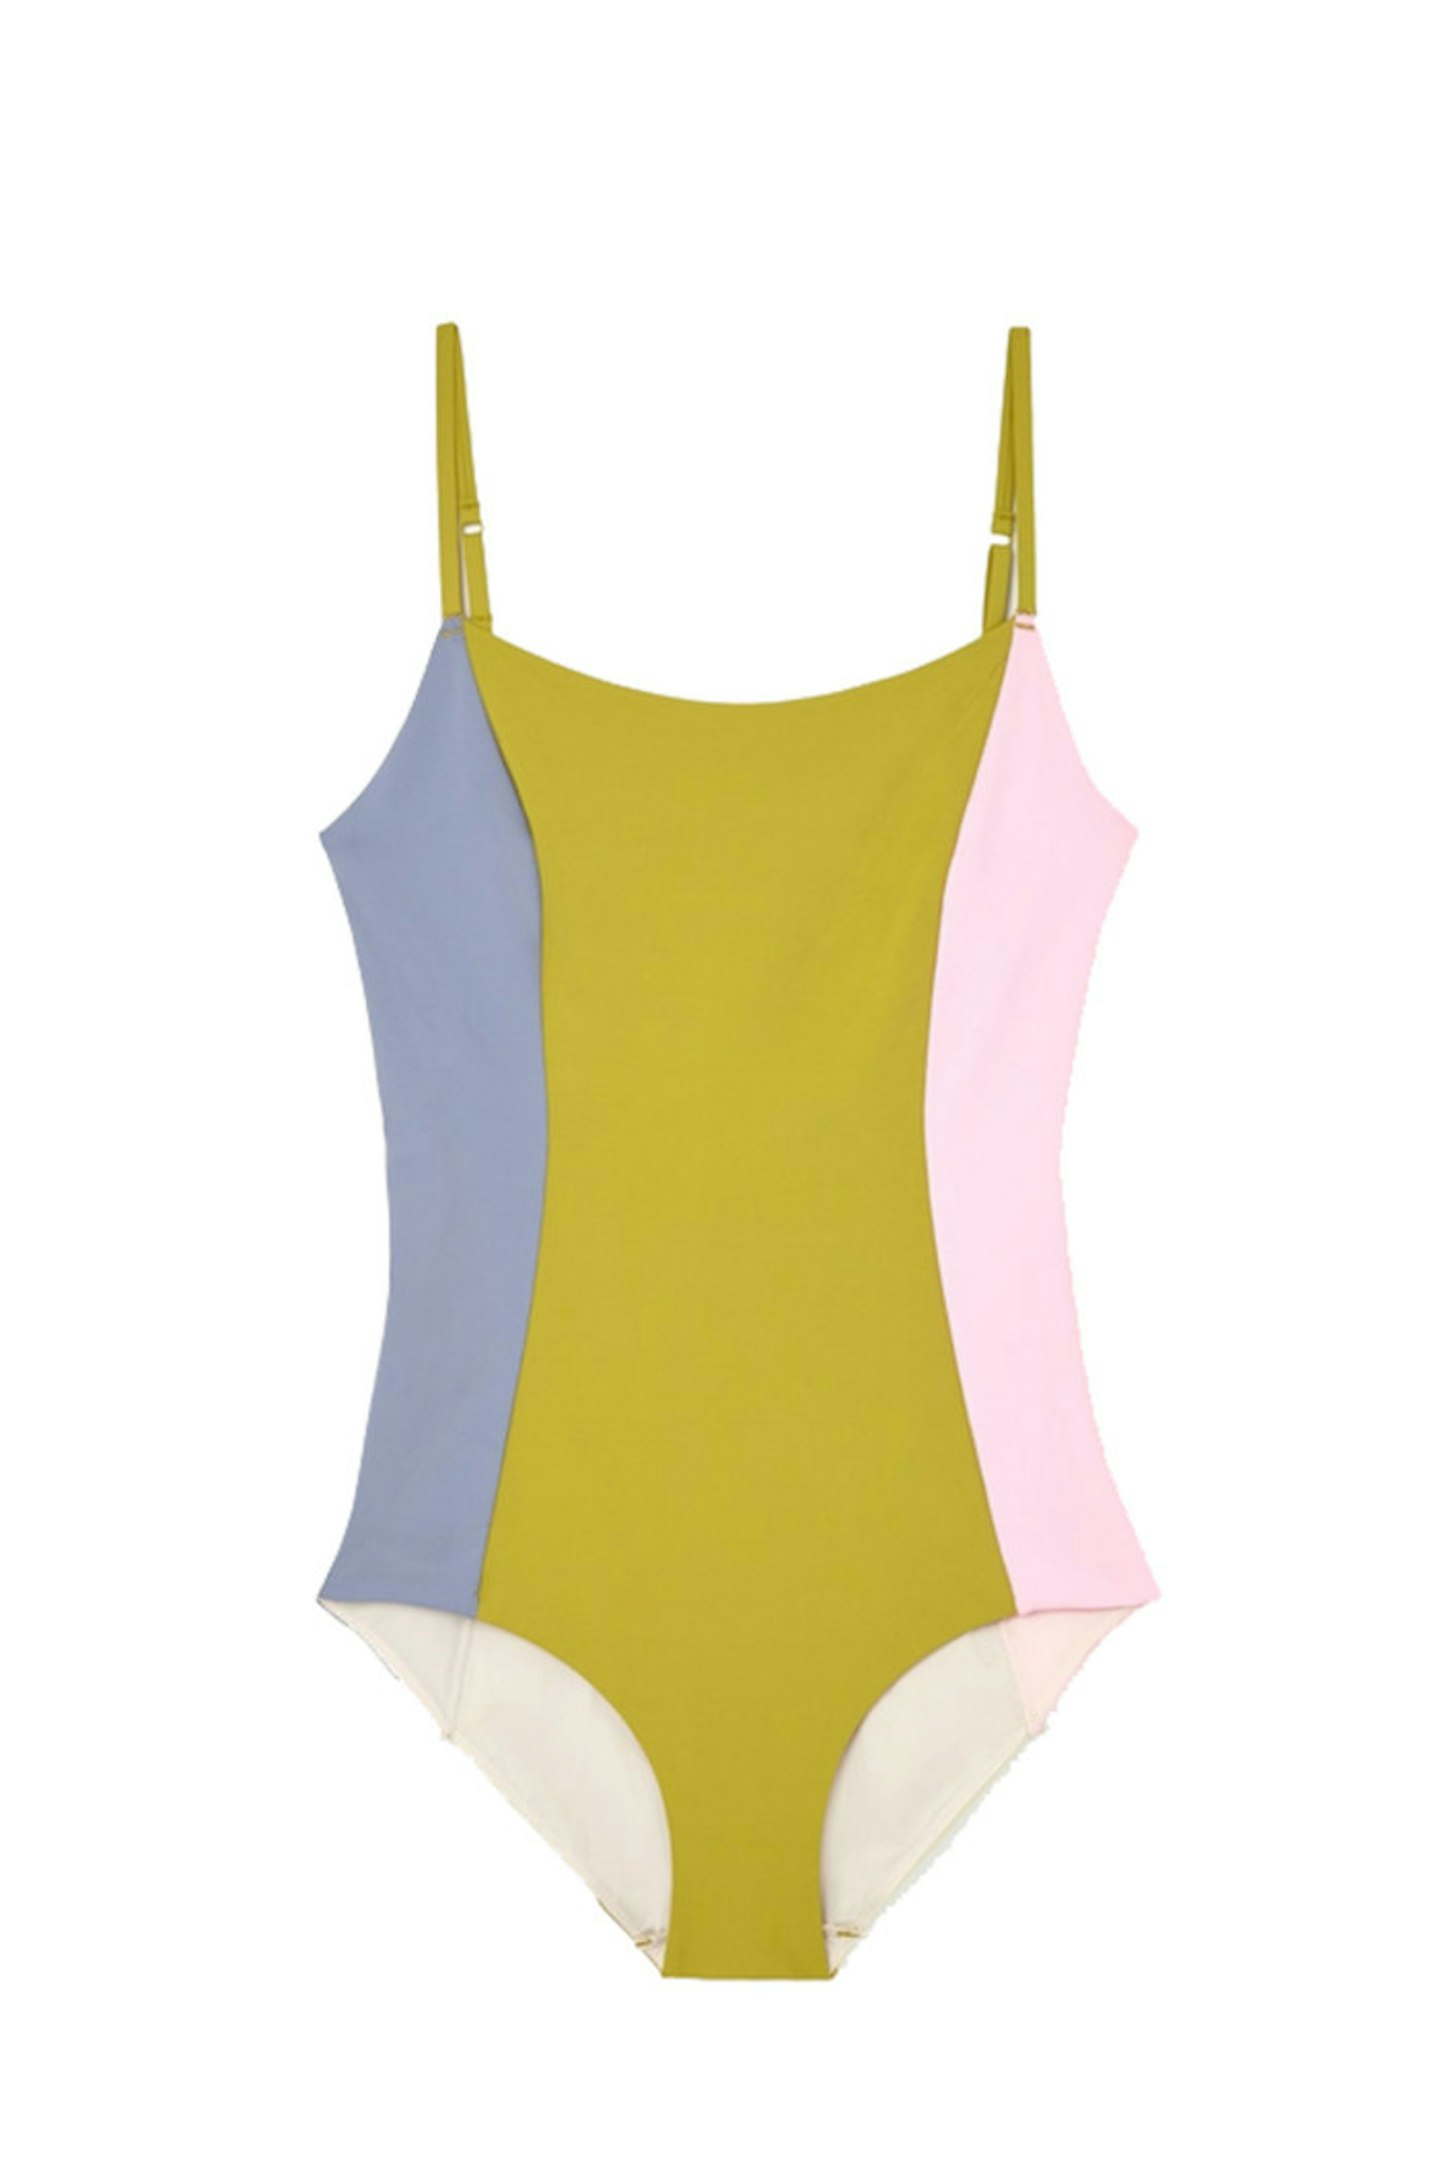 One piece swimsuits are having a moment. Not just are they super flattering - especially this colour block style with waist-slimming panels - but they make a serious style statement on the beach.